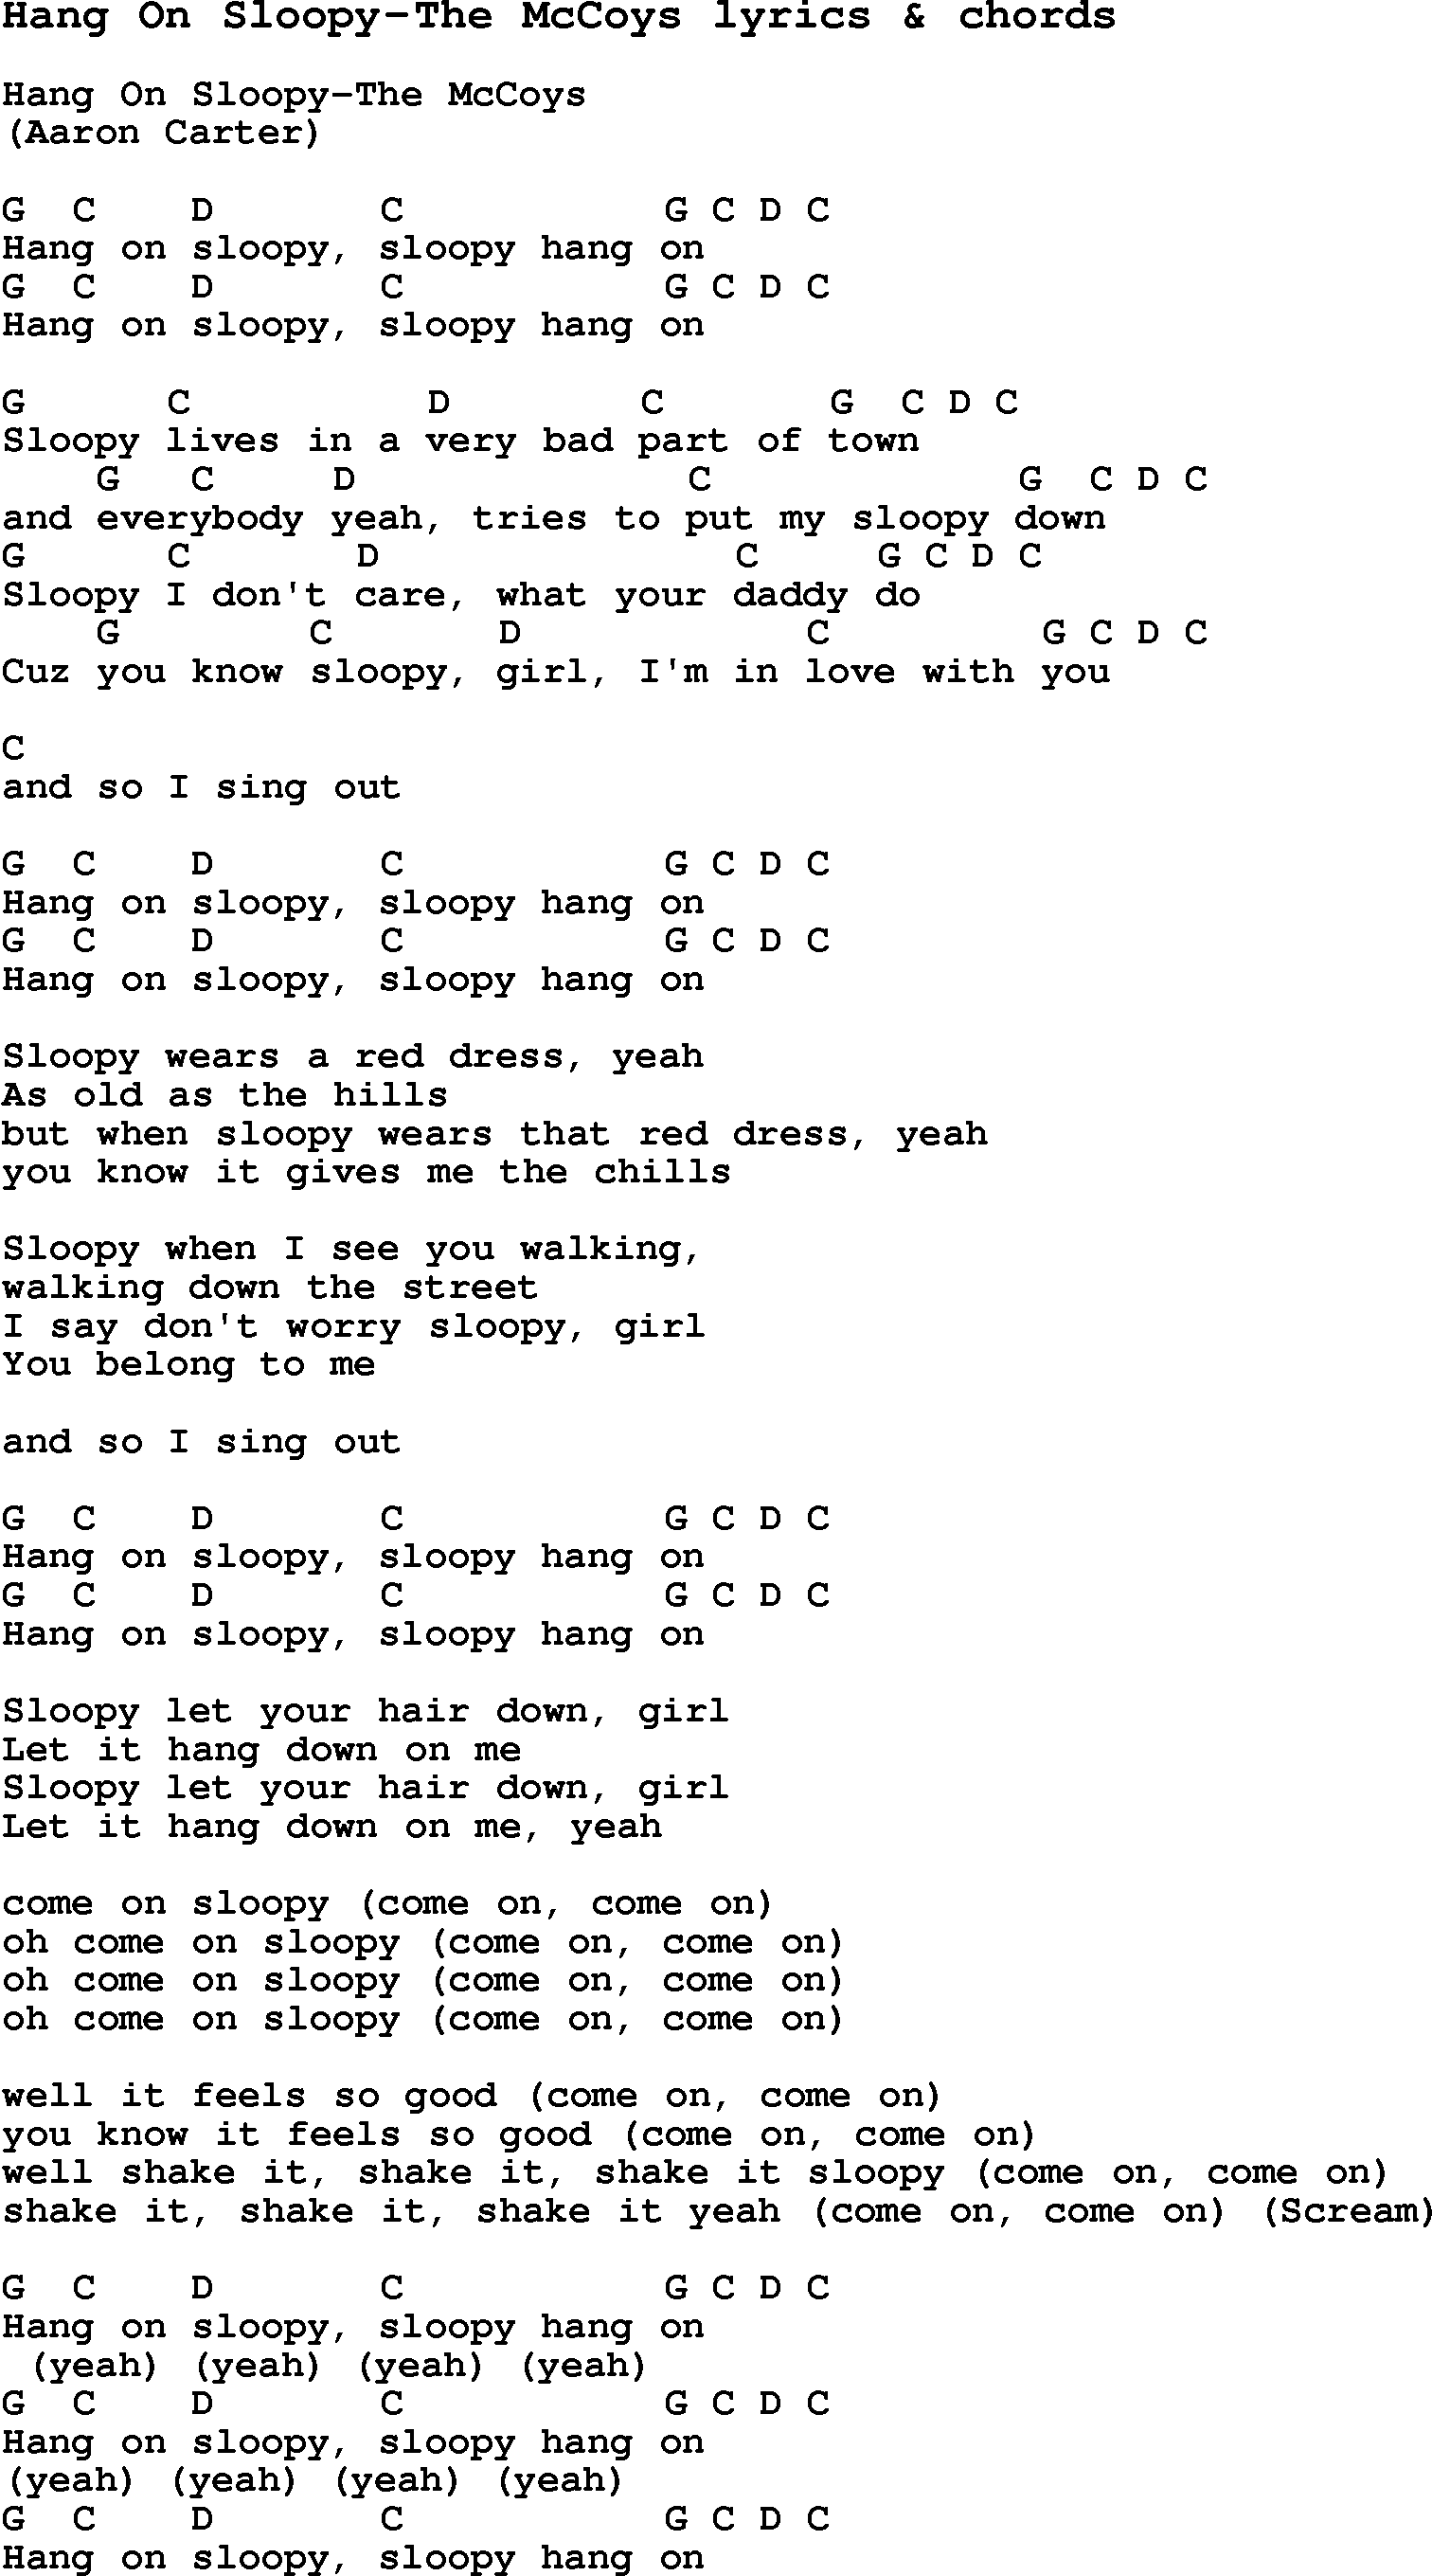 Love Song Lyrics for: Hang On Sloopy-The McCoys with chords for Ukulele, Guitar Banjo etc.